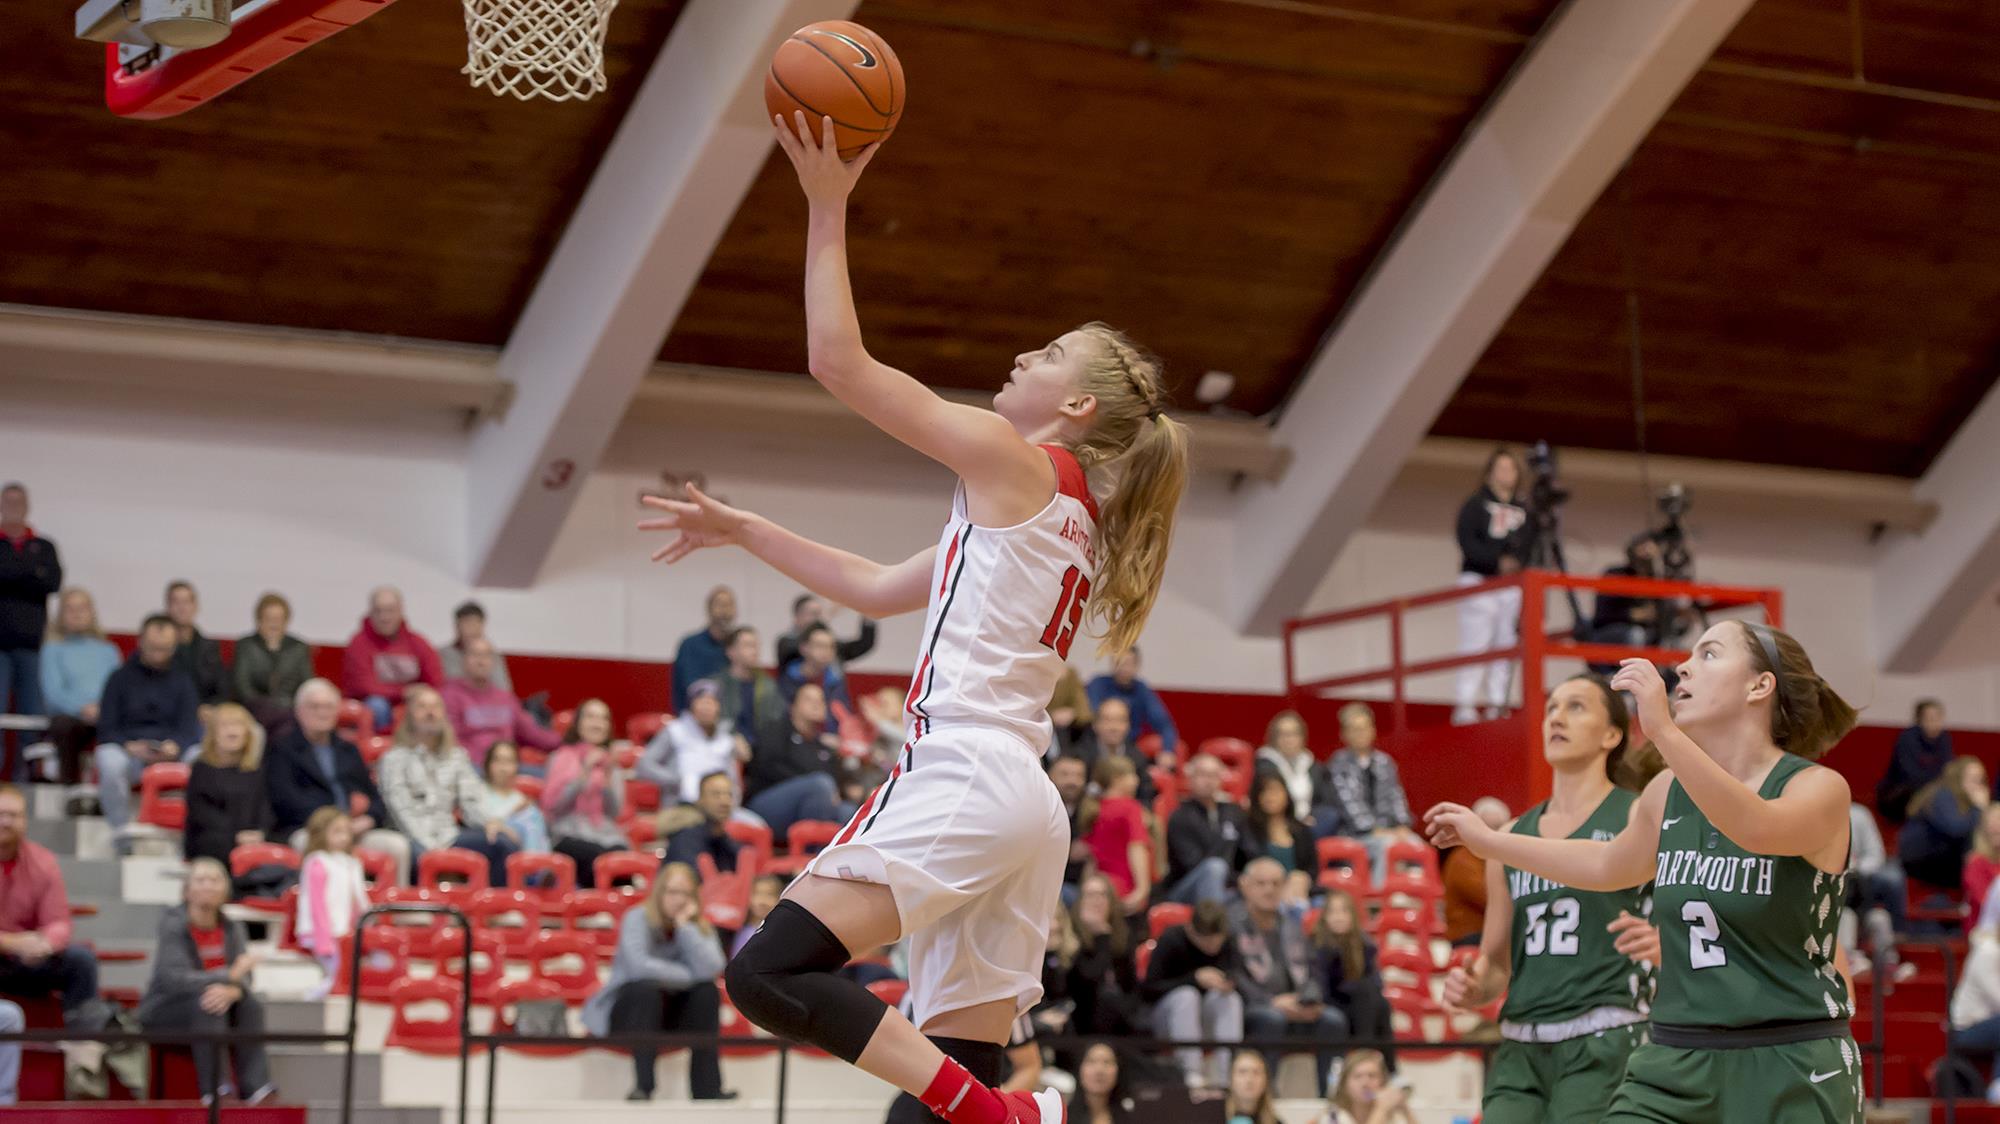 Katie Armstrong attempts to score a layup during a Fairfield game.